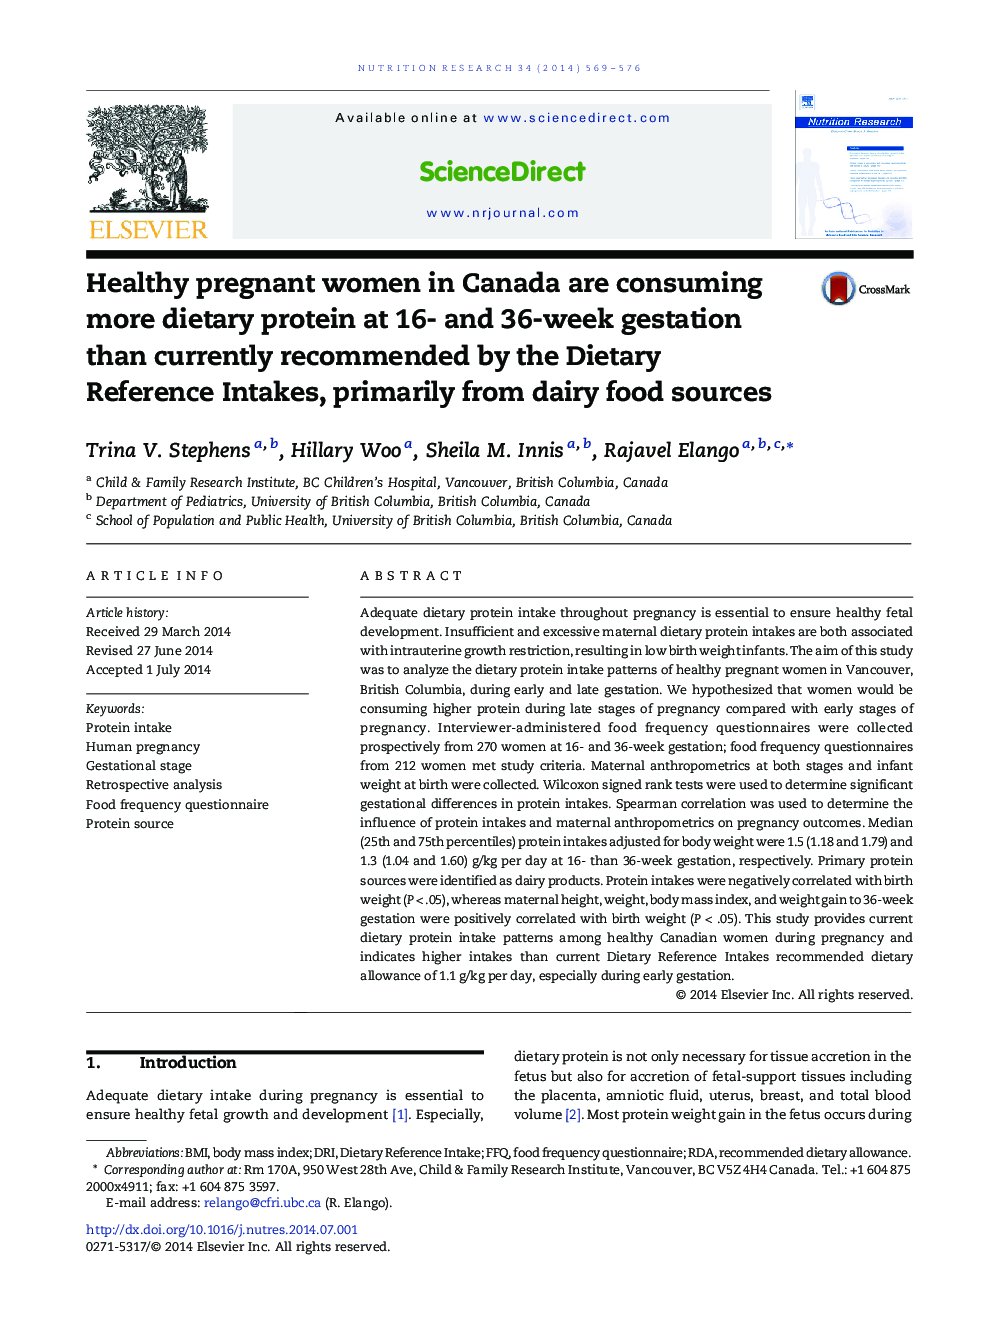 Healthy pregnant women in Canada are consuming more dietary protein at 16- and 36-week gestation than currently recommended by the Dietary Reference Intakes, primarily from dairy food sources